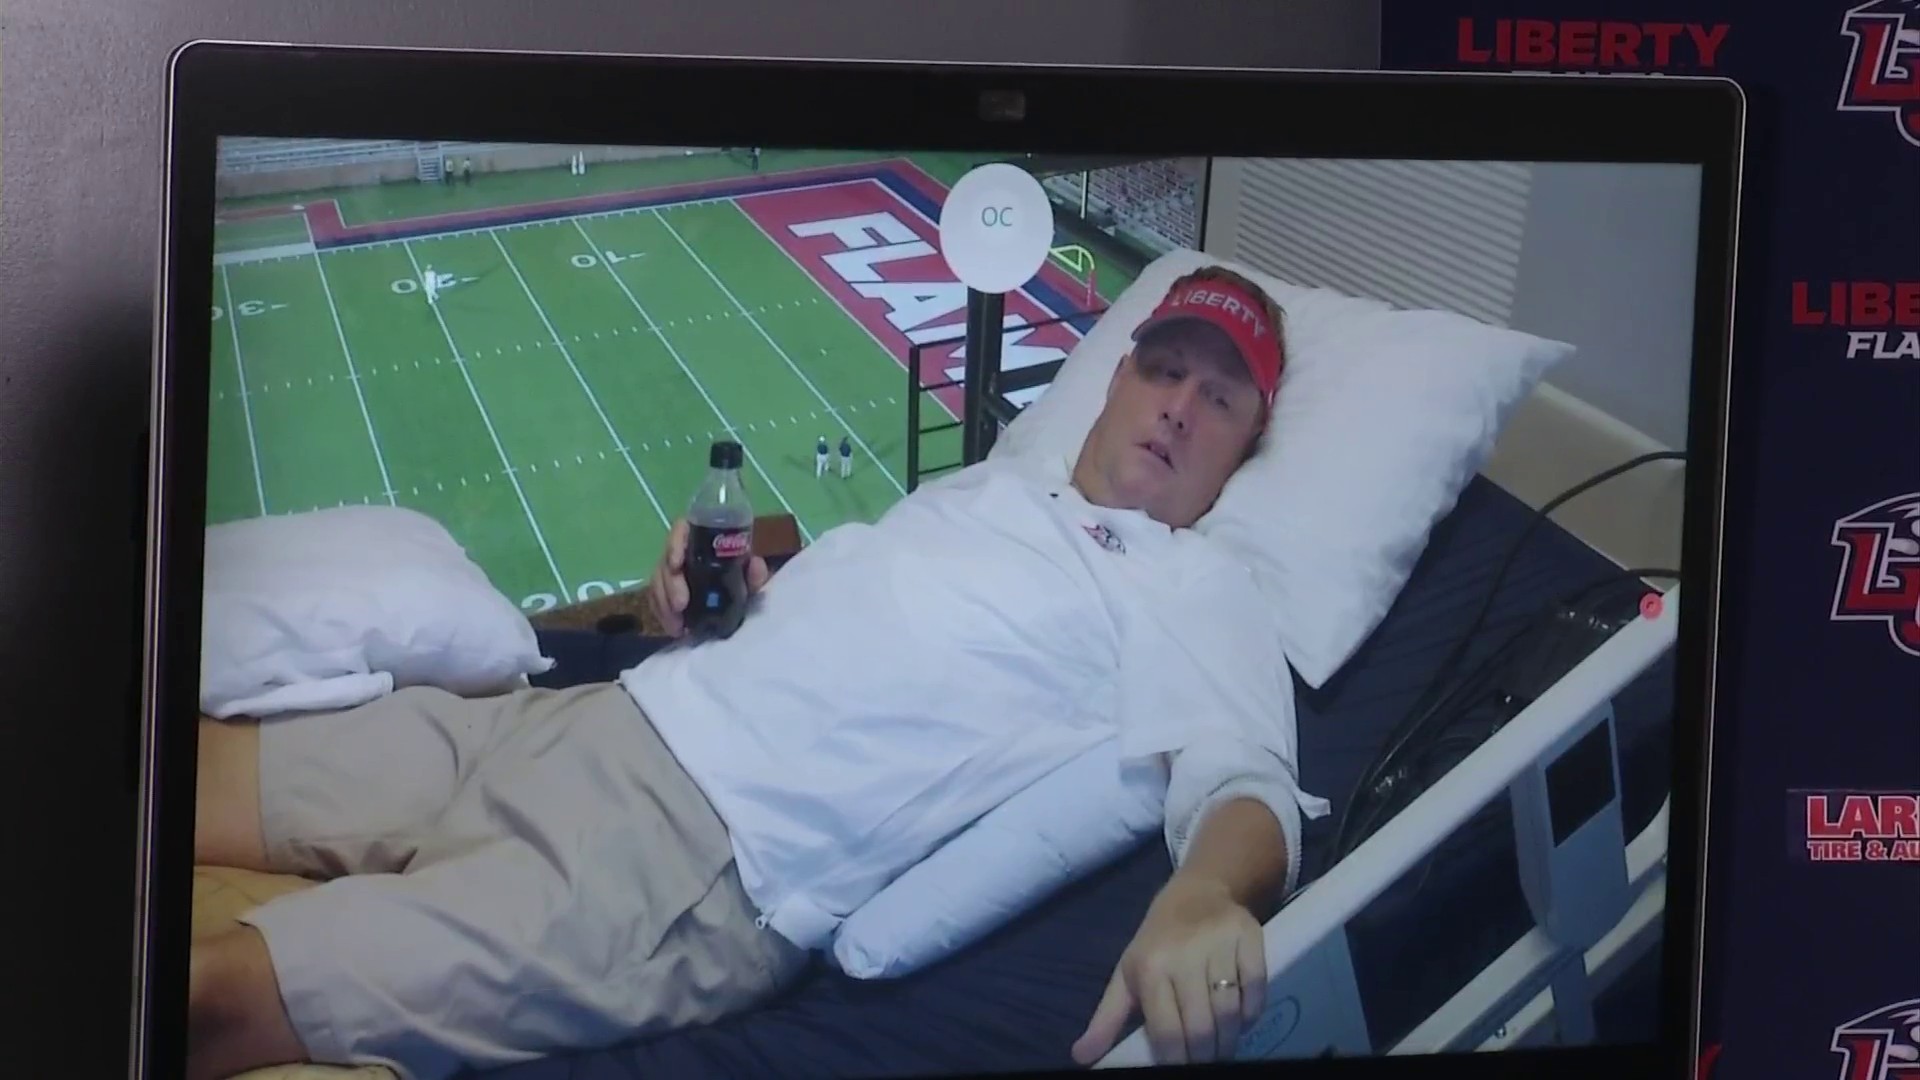 Hugh Freeze says he was in no pain coaching from hospital bed in Liberty  box Saturday